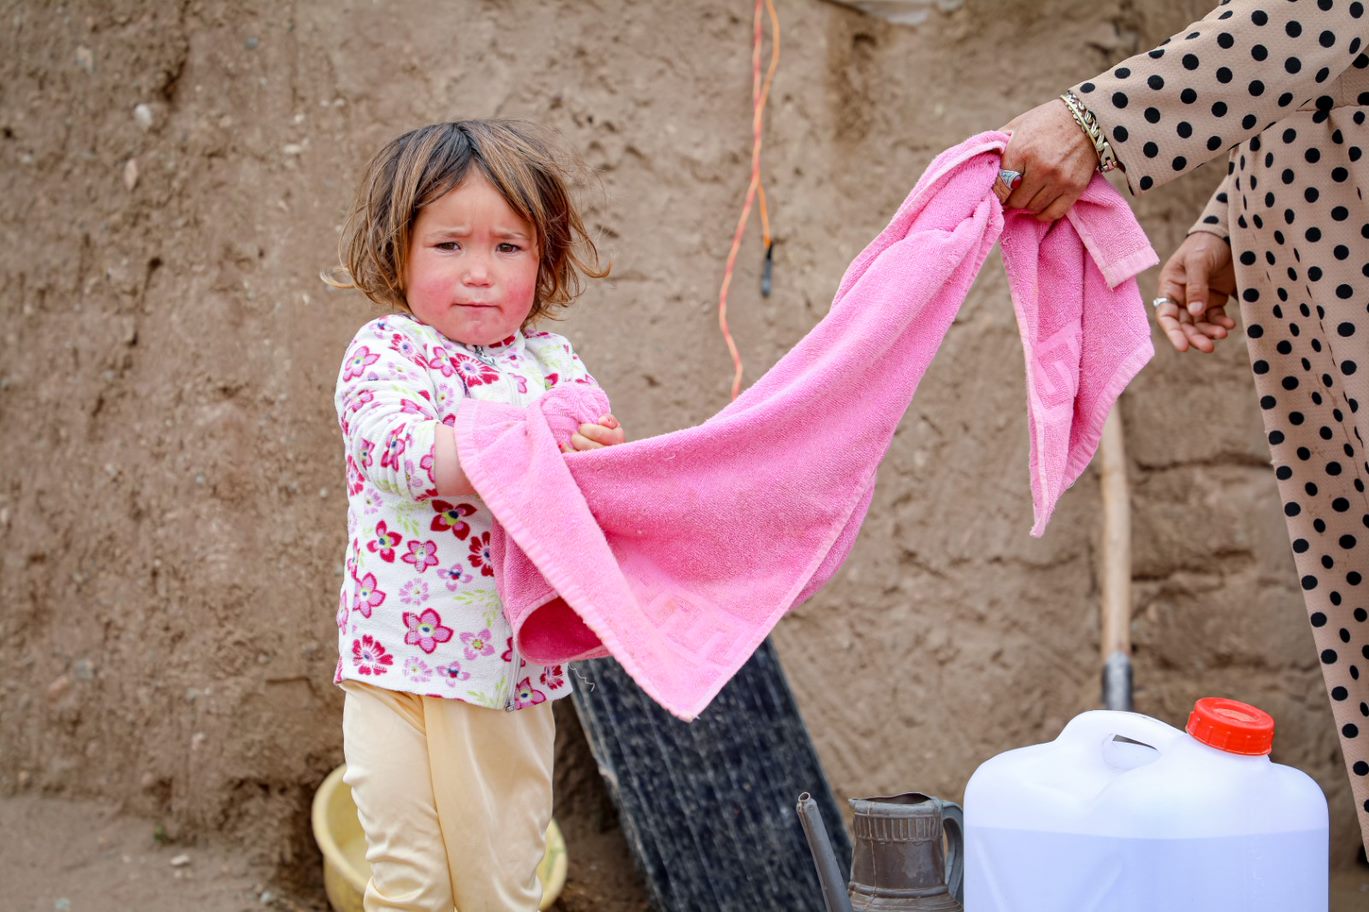 Refugee girl in Afghanistan dries her hands on a pink towel being handed to her by an adult